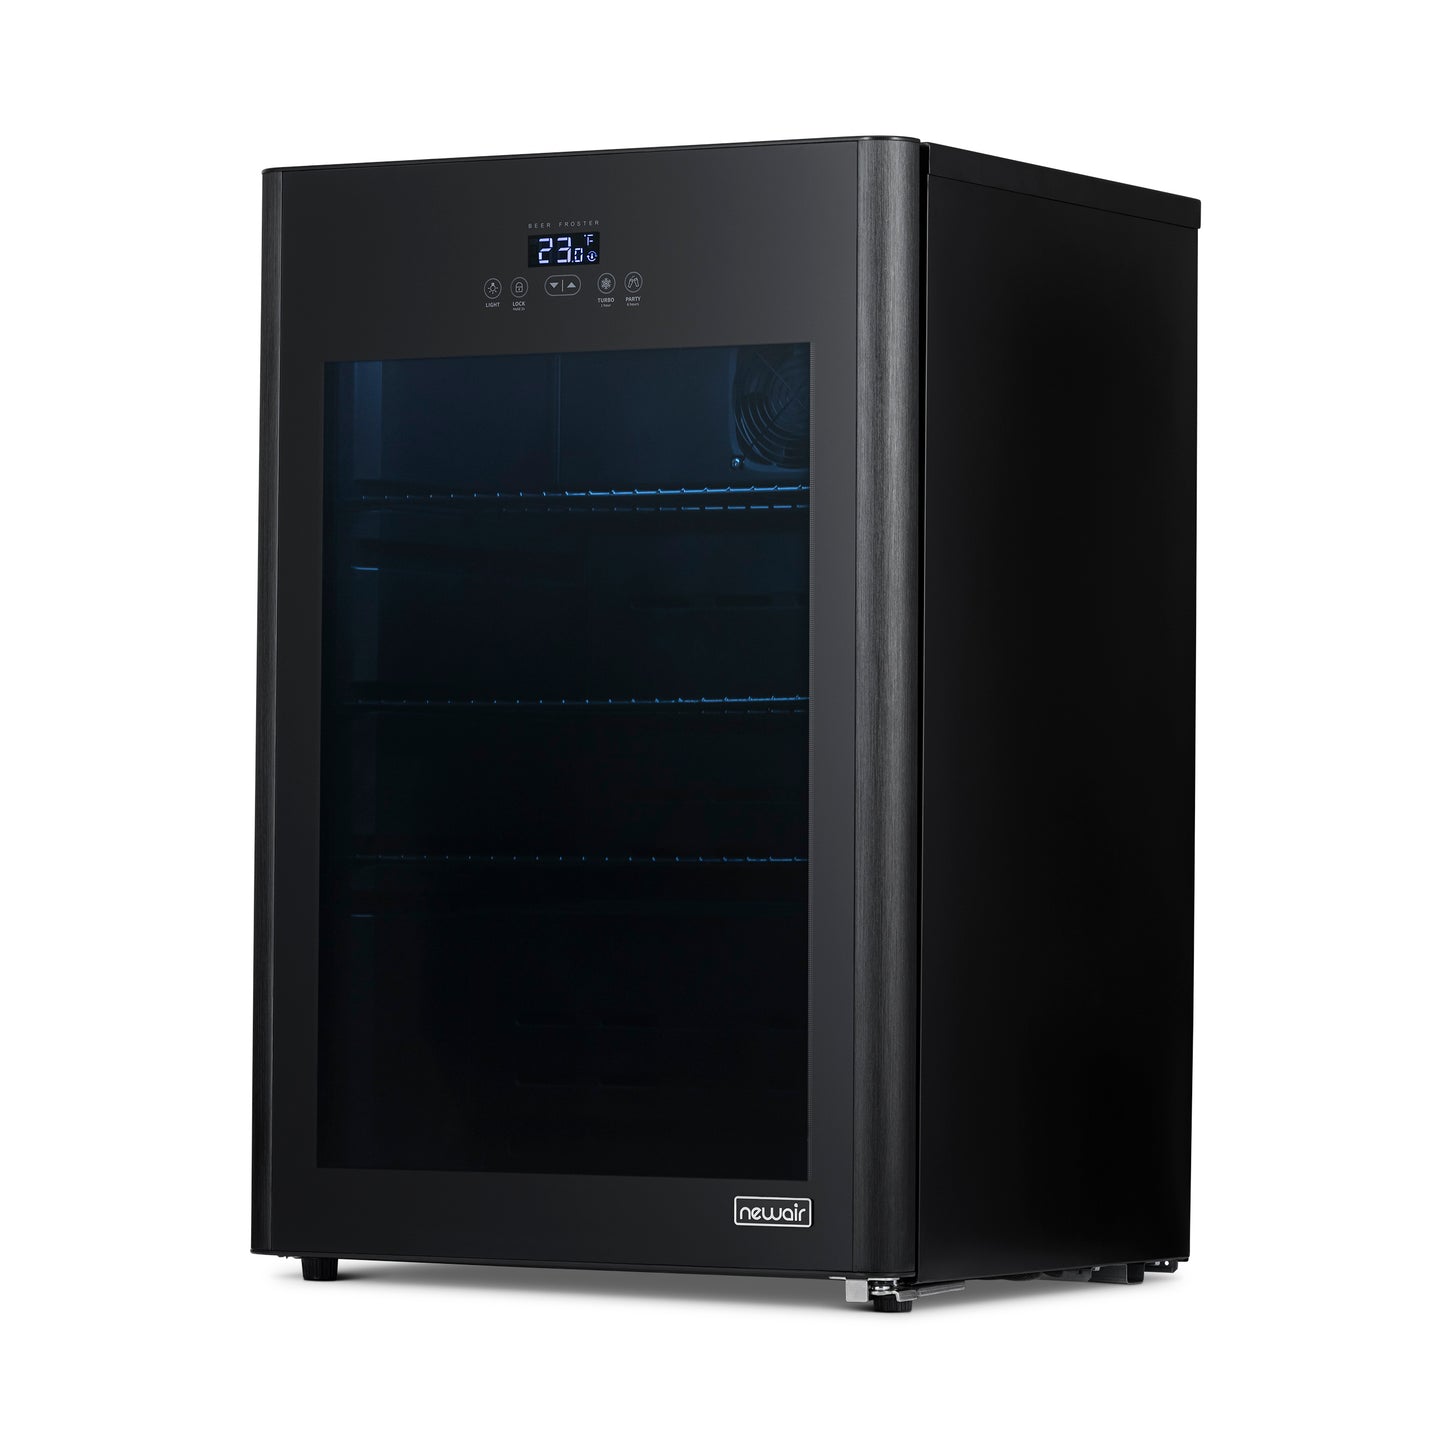 Newair Froster 125 Can Freestanding Beverage Fridge in Black, Chills Down to 23 Degrees NBF125BK00-Beverage Fridges-The Wine Cooler Club